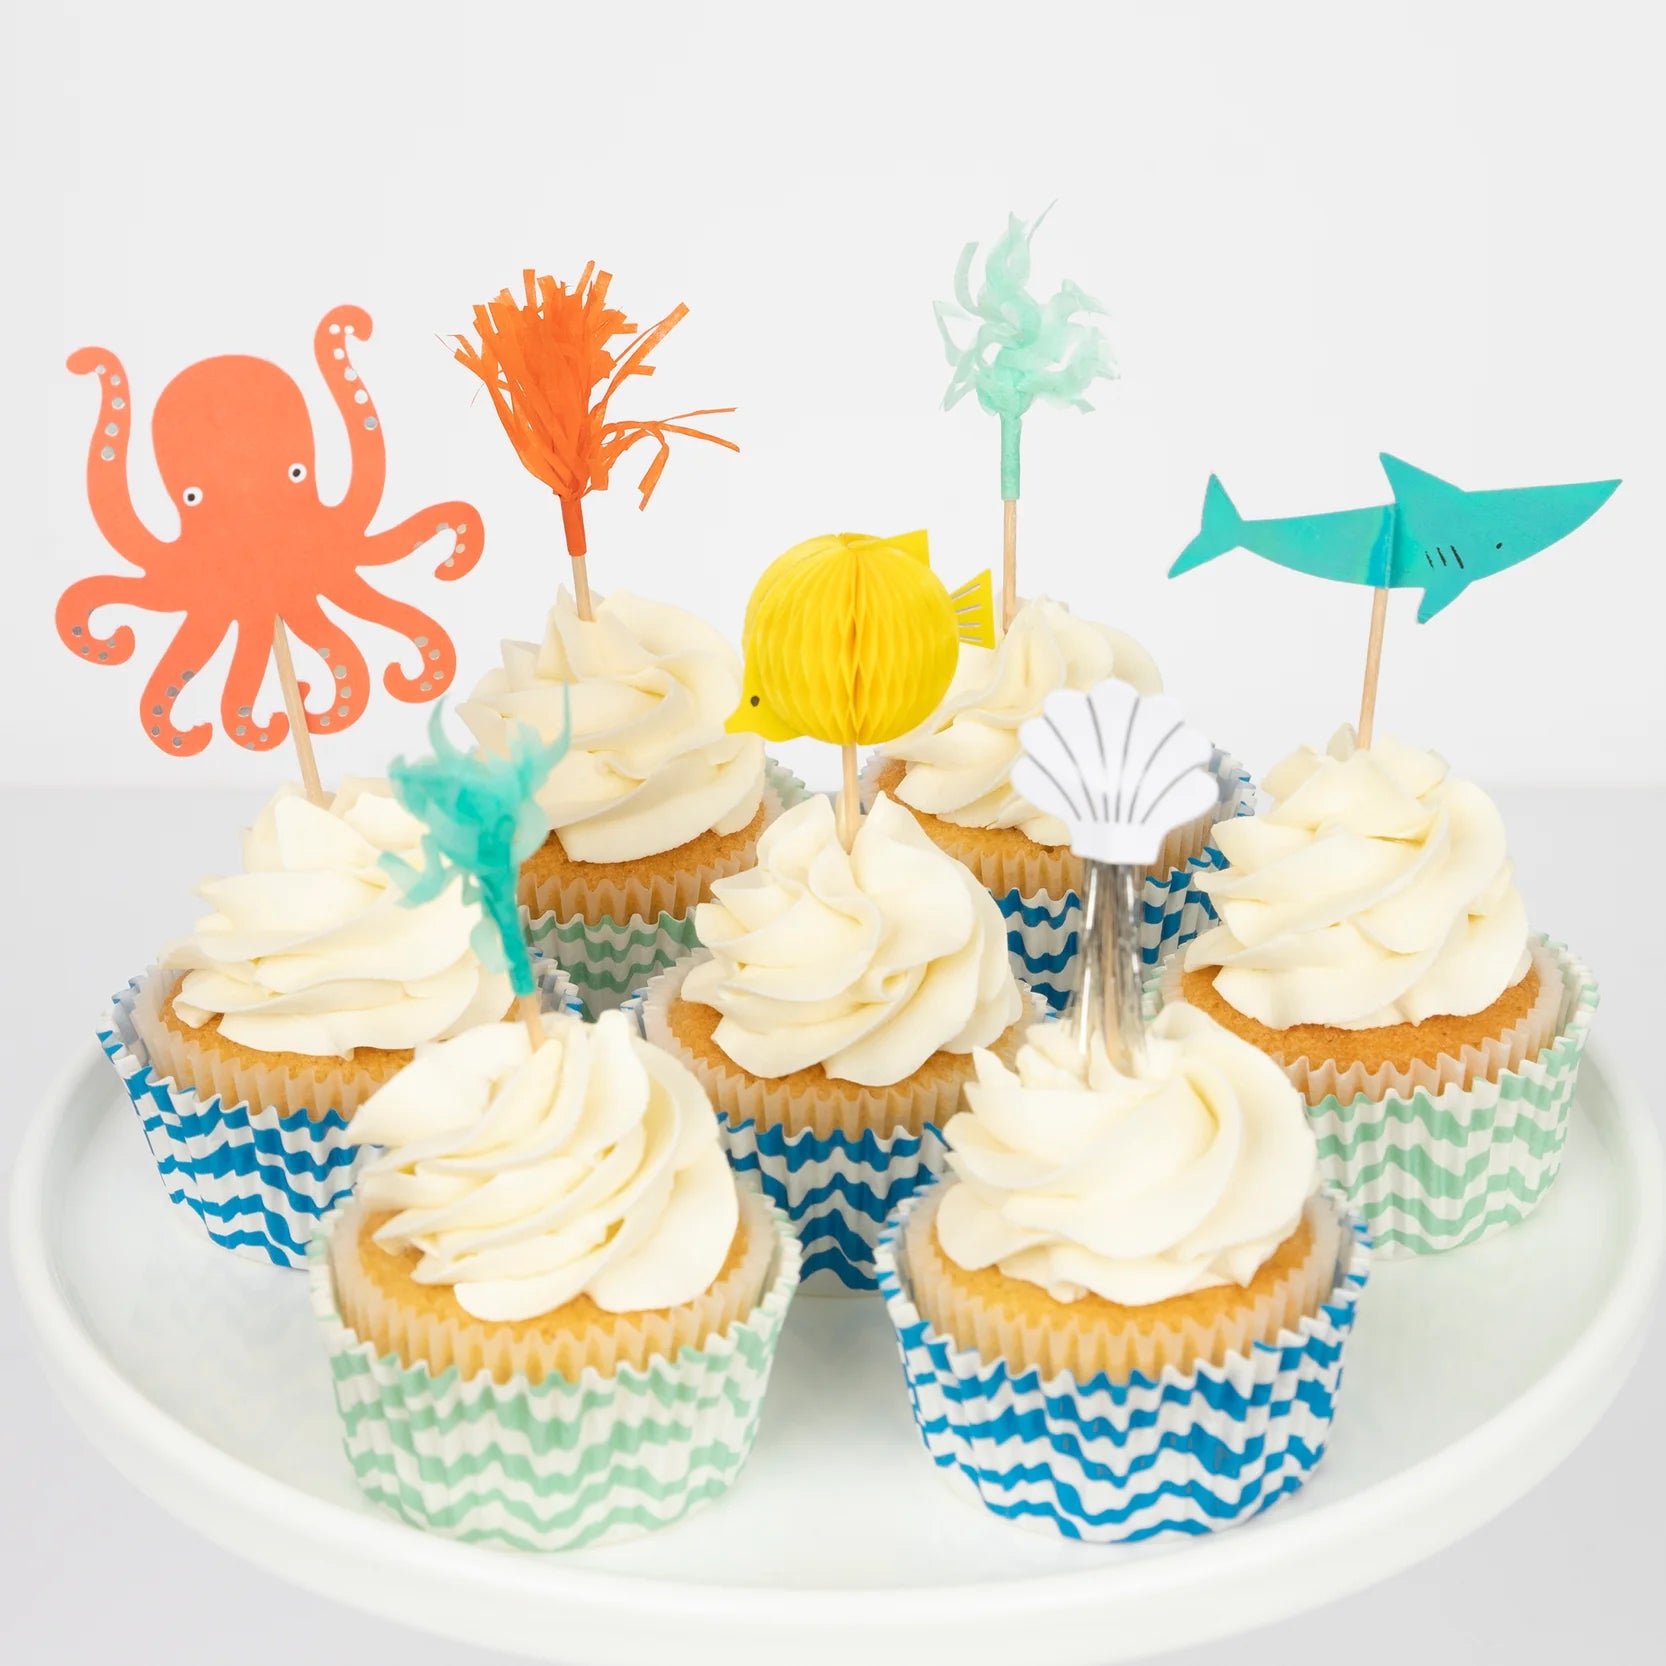 Under the Sea Cupcake Decorating Kit 24ct | The Party Darling